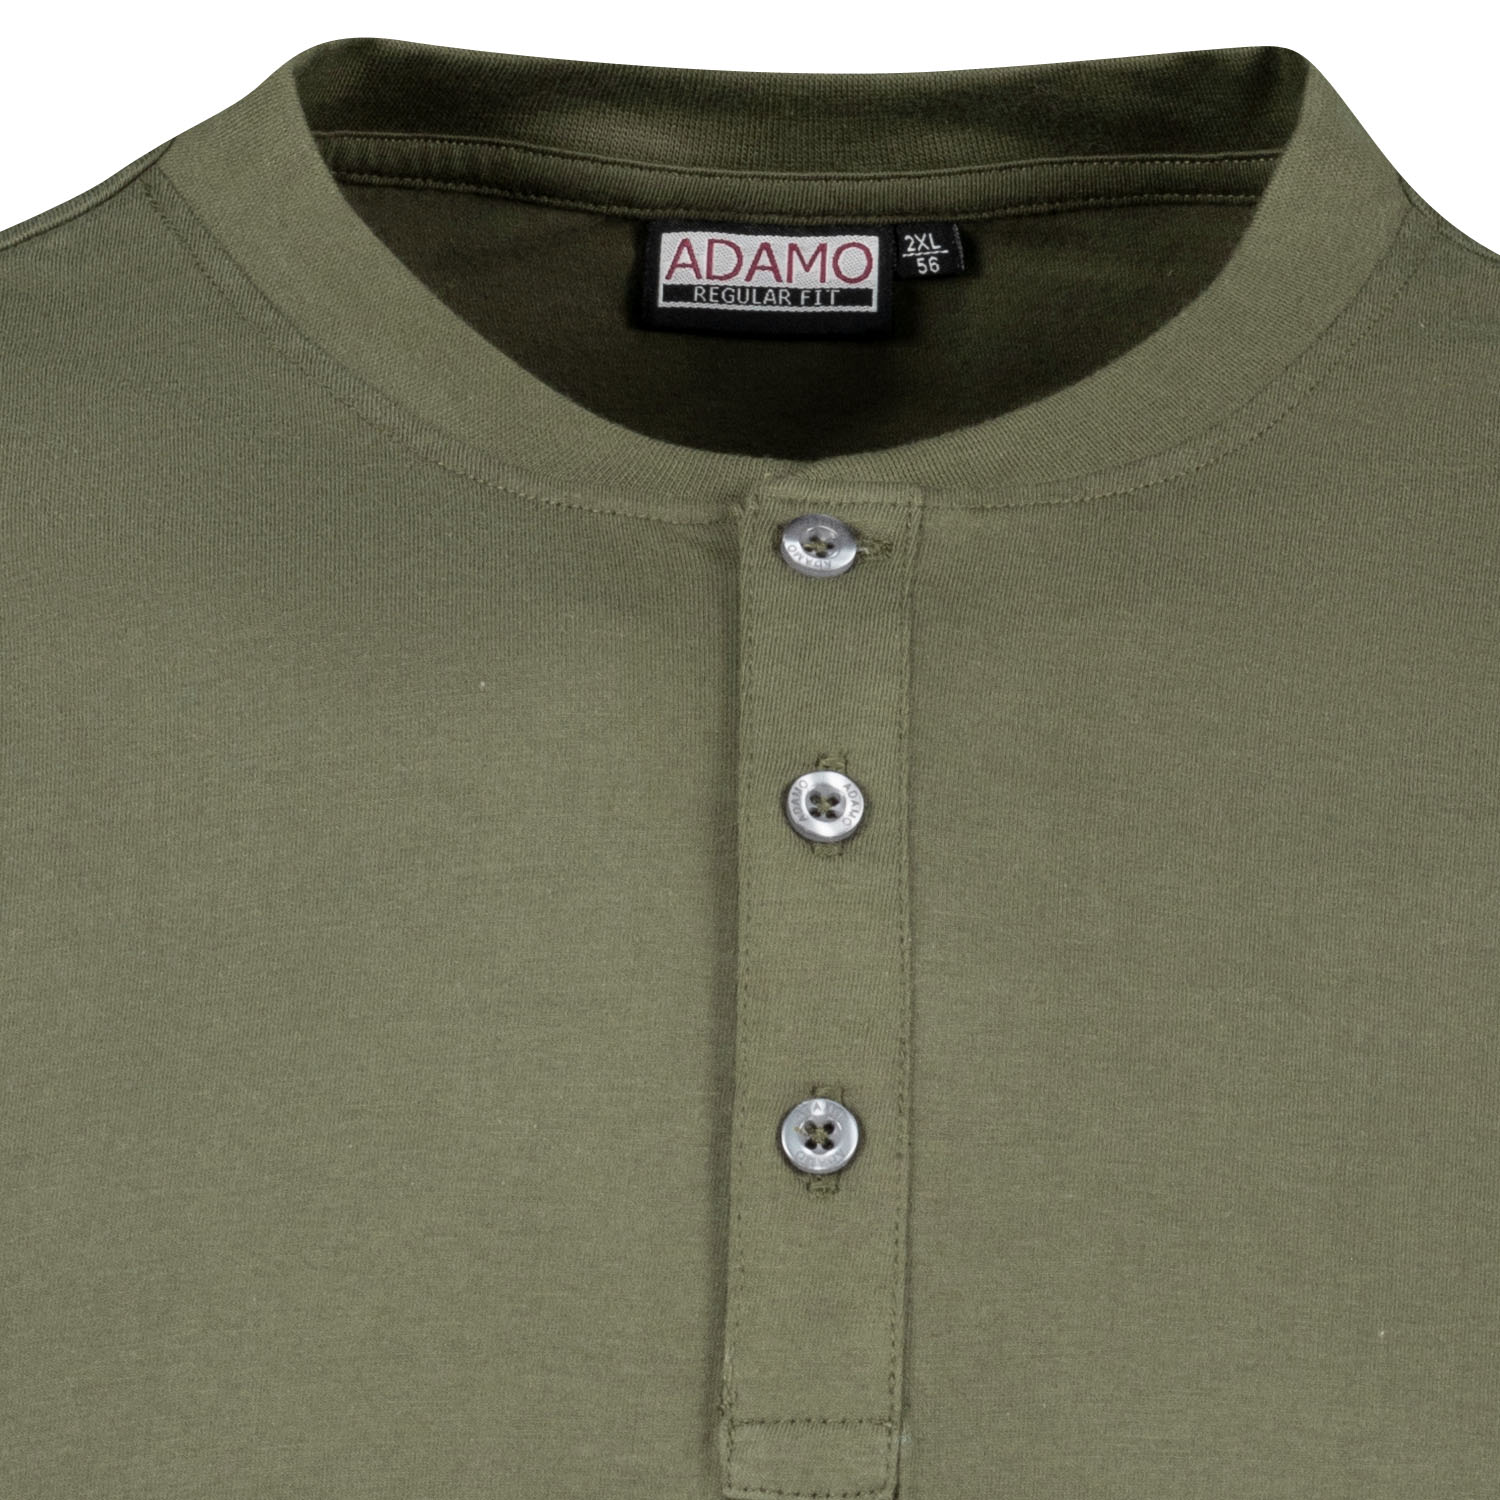 T-shirt in olive series Silas regular fit by Adamo for men up to oversize 10XL